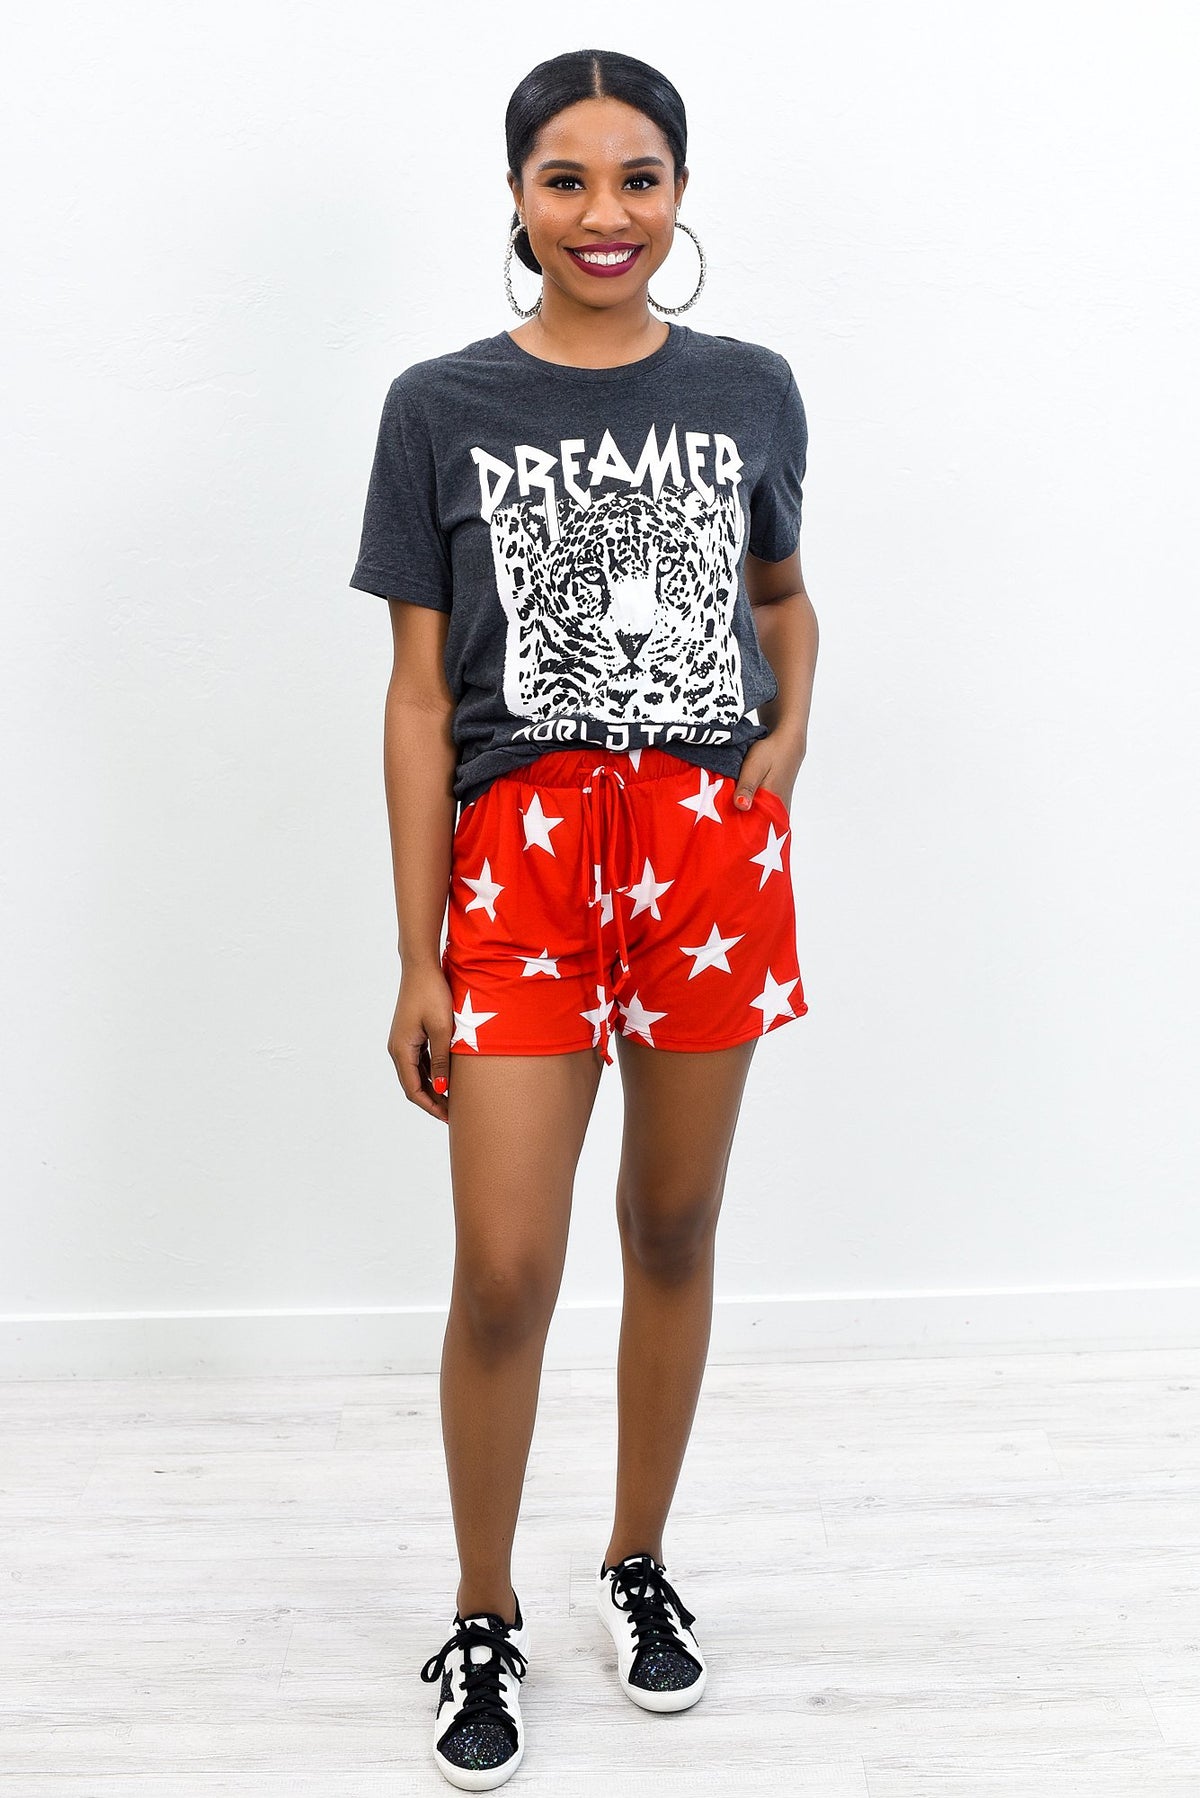 The Stars Are Shining Red/Ivory Star Printed Shorts - I1258RD